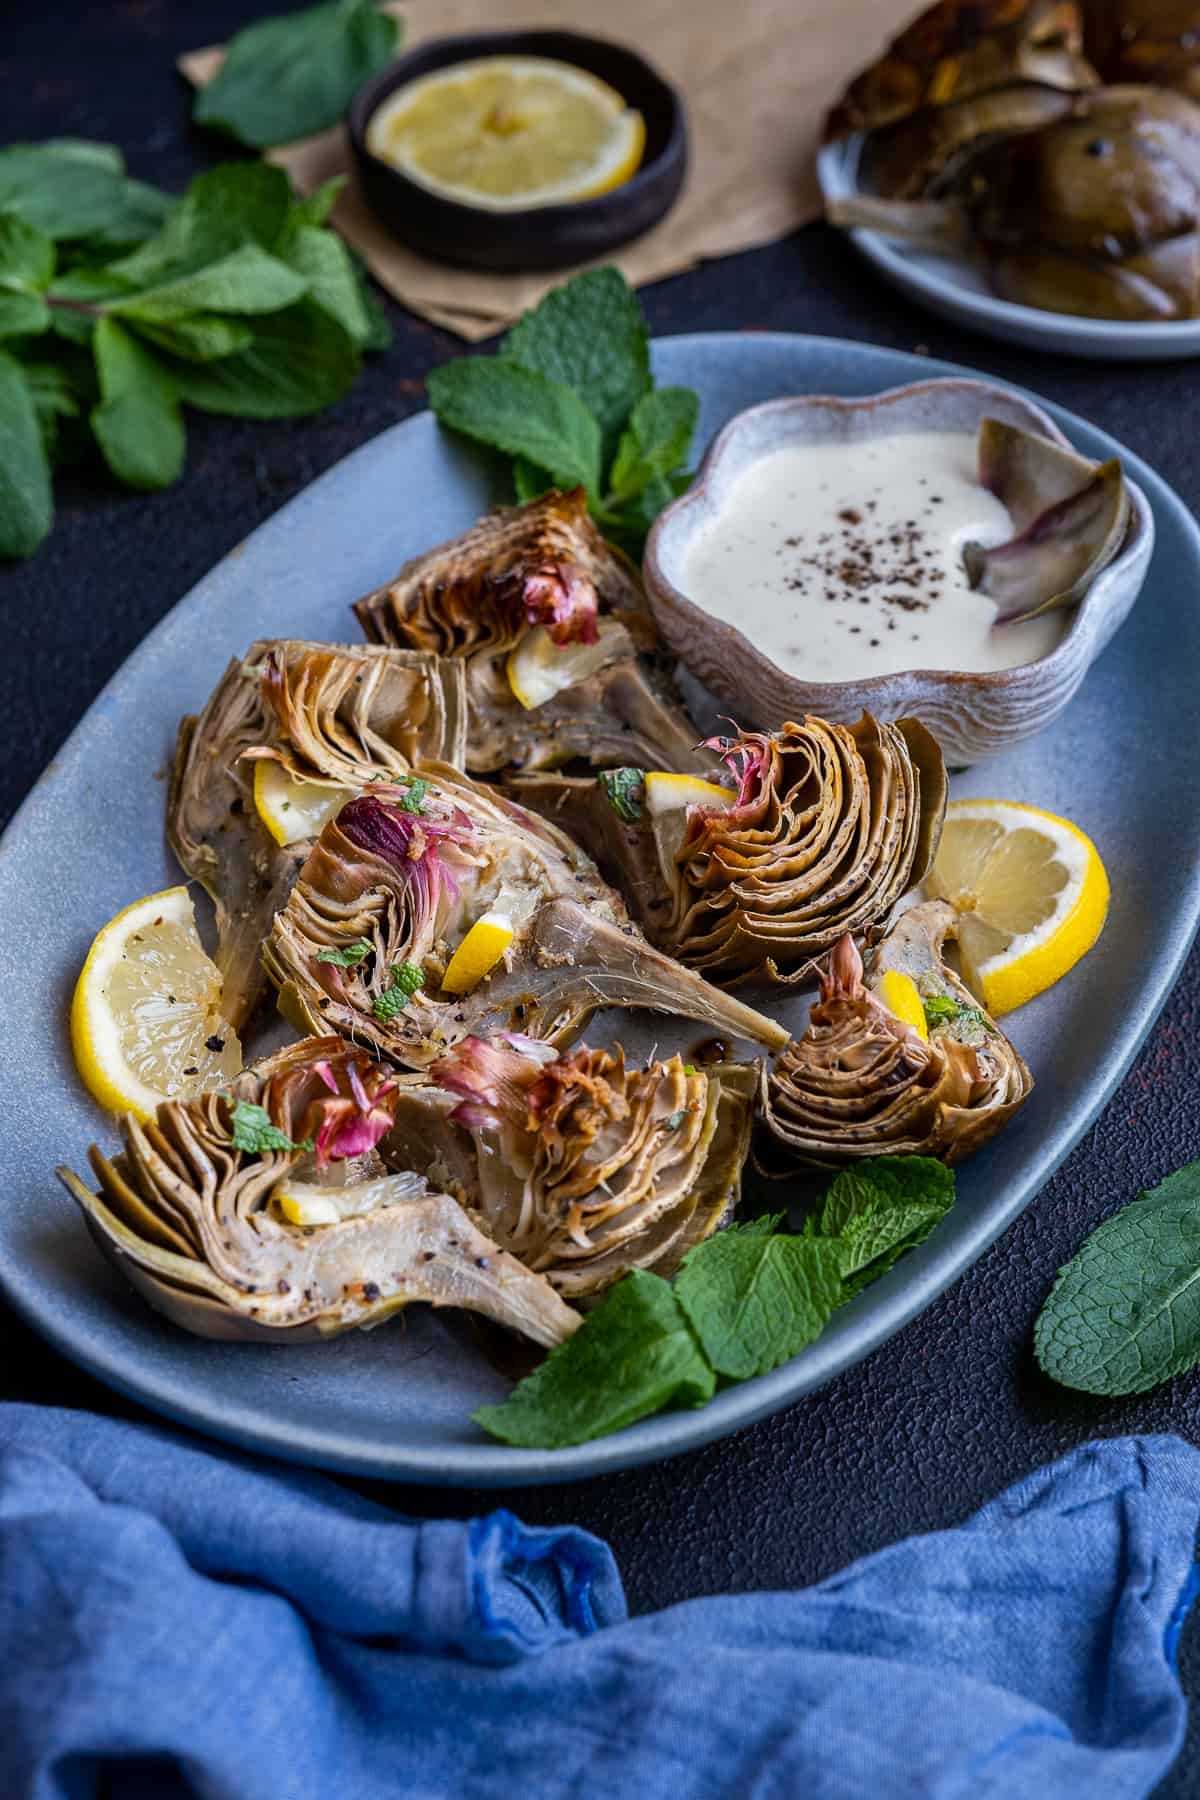 Roasted artichokes served on an oval plate with a bowl of dipping sauce on the side photographed from front view.